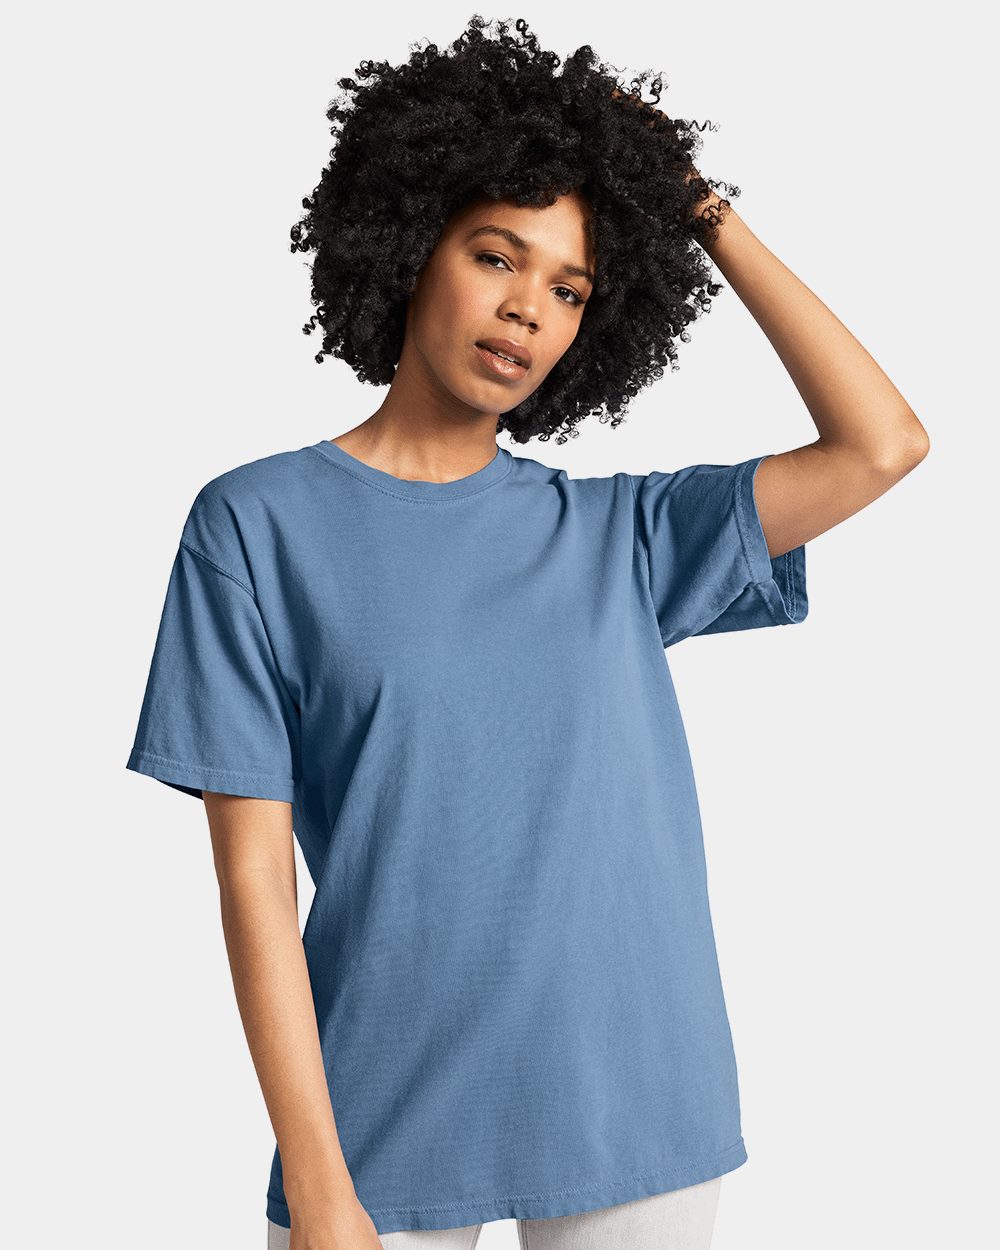 Pretreated Comfort Colors 1717 Garment-Dyed Heavyweight T-Shirt – CheaterTee